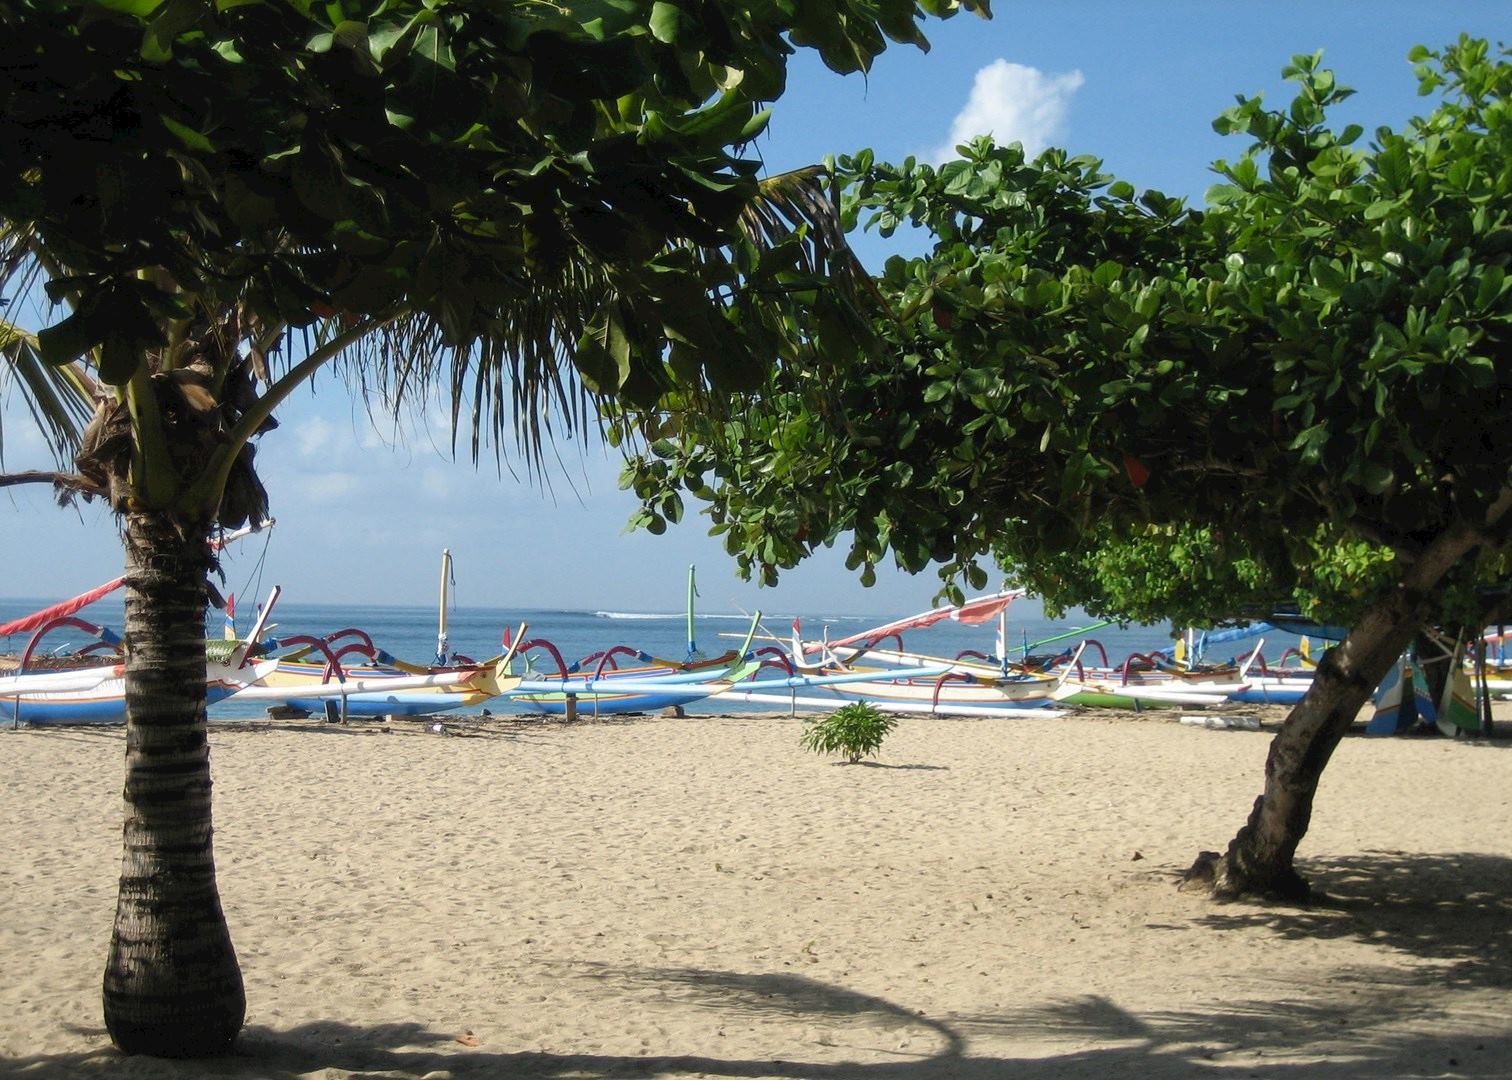 Visit Sanur on a trip to Indonesia | Audley Travel